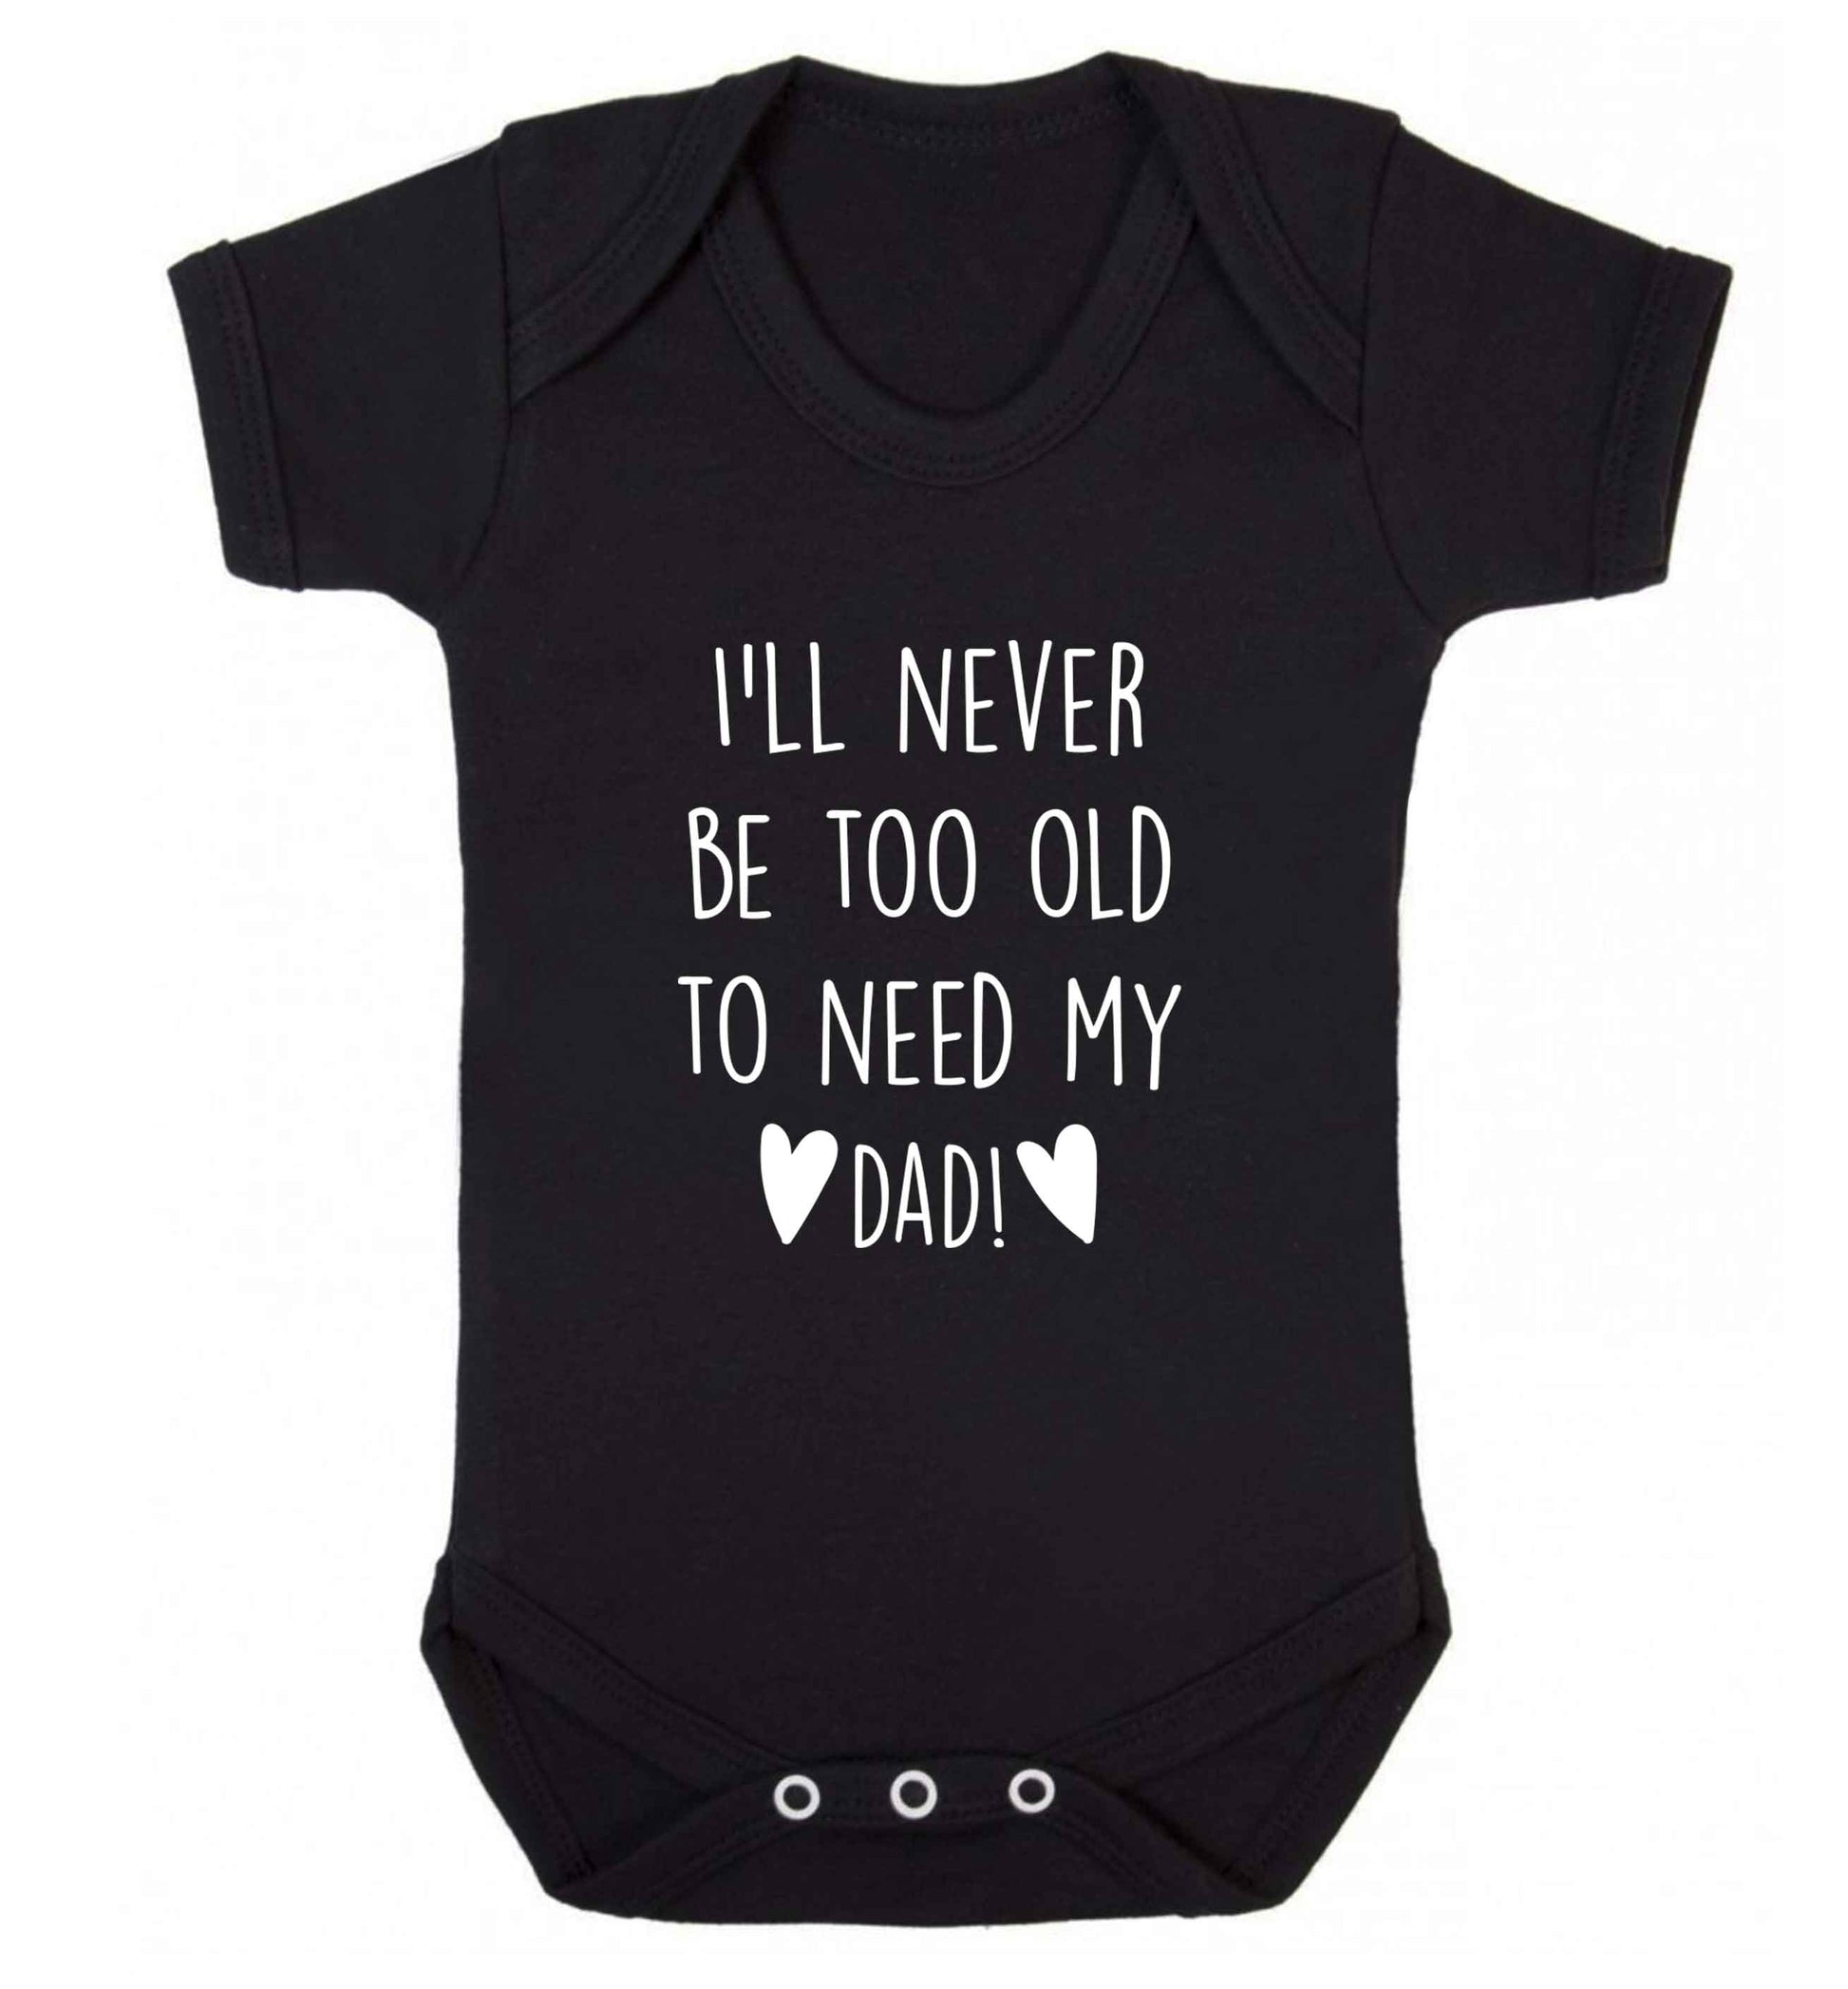 I'll never be too old to need my dad baby vest black 18-24 months